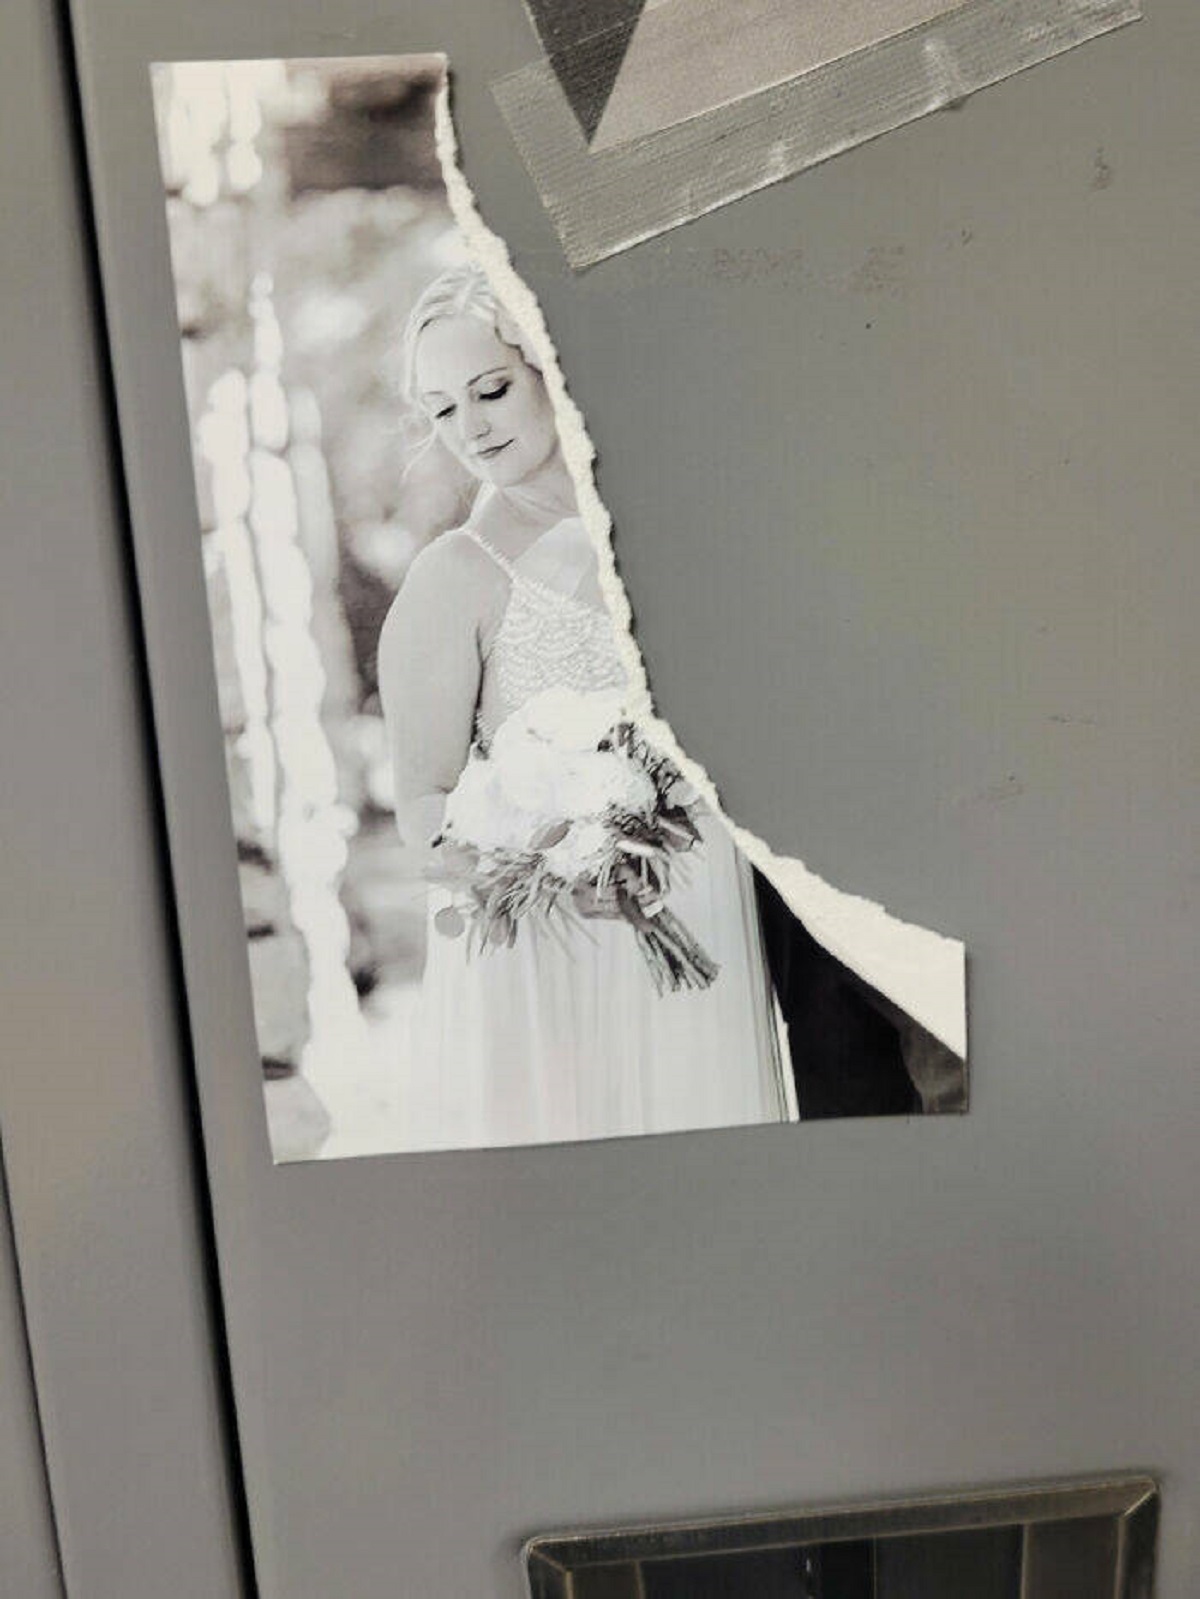 "Someone At Work (Nursing) Perfectly Ripped My Husband Out Of The Wedding Photo On My Locker. There's No Way This Was Accidental"